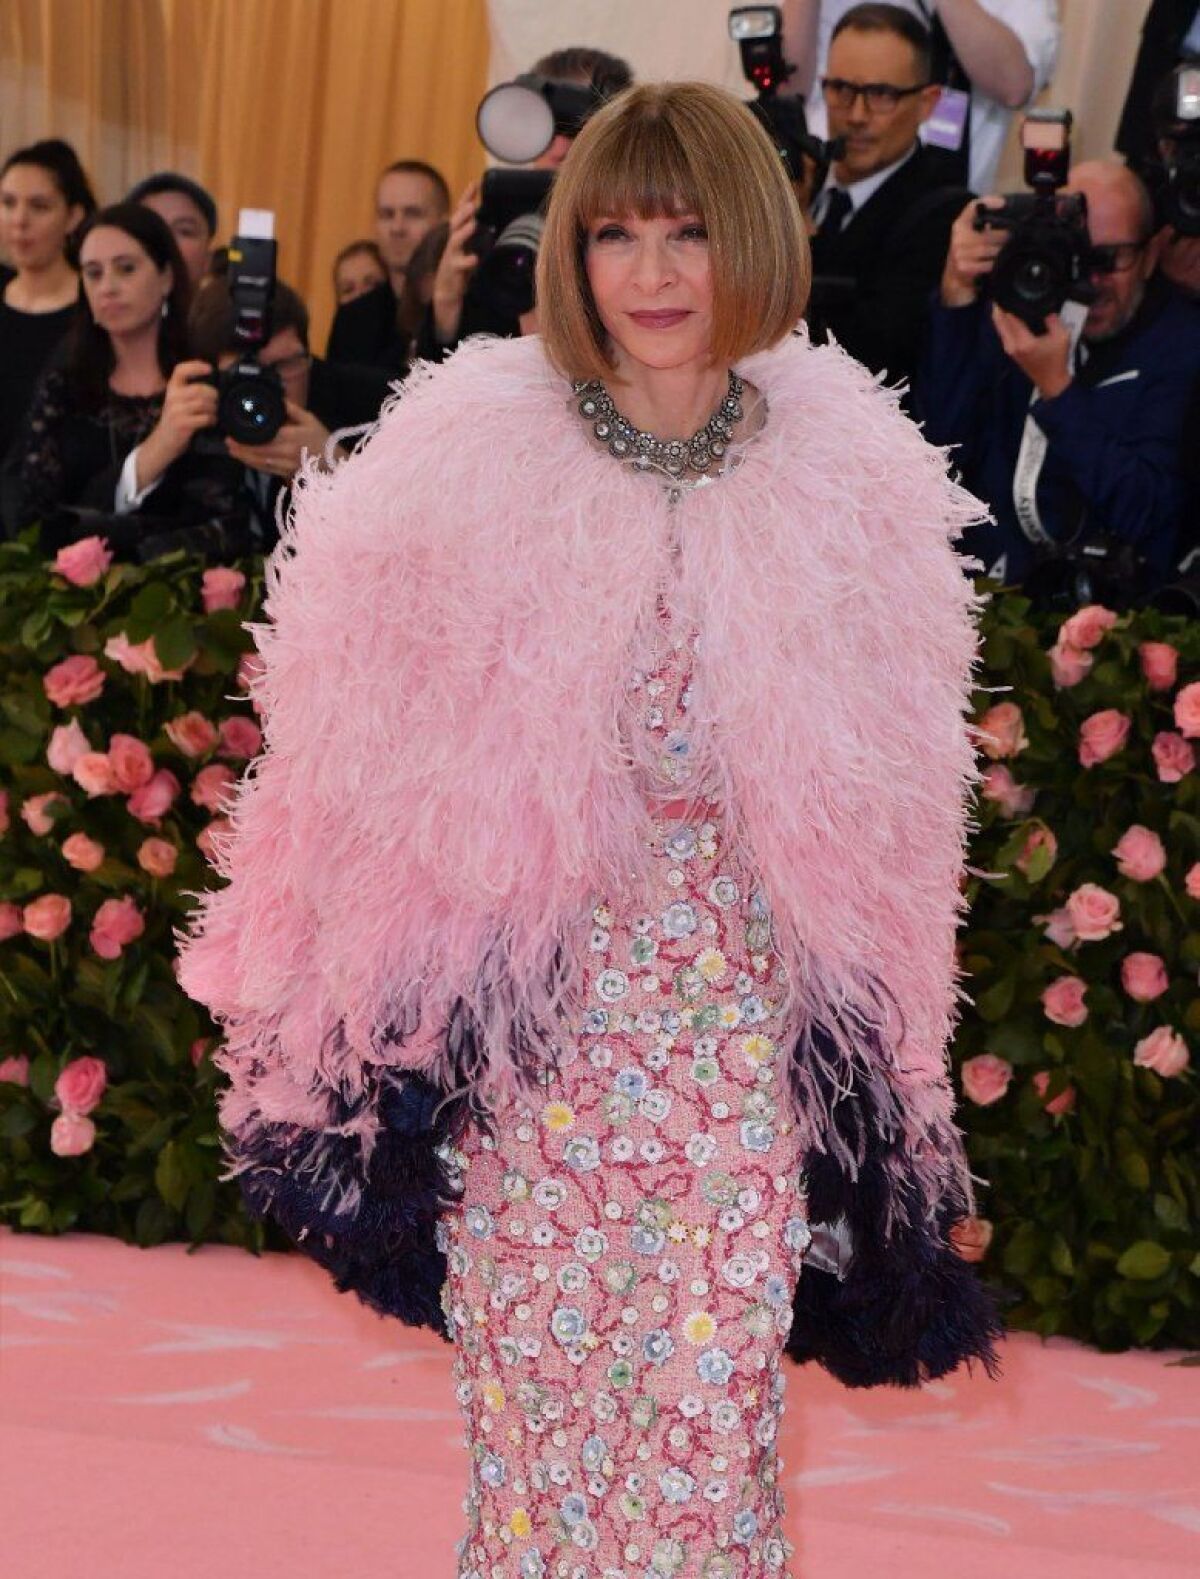 Vogue editor-in-chief Anna Wintour in Chanel.